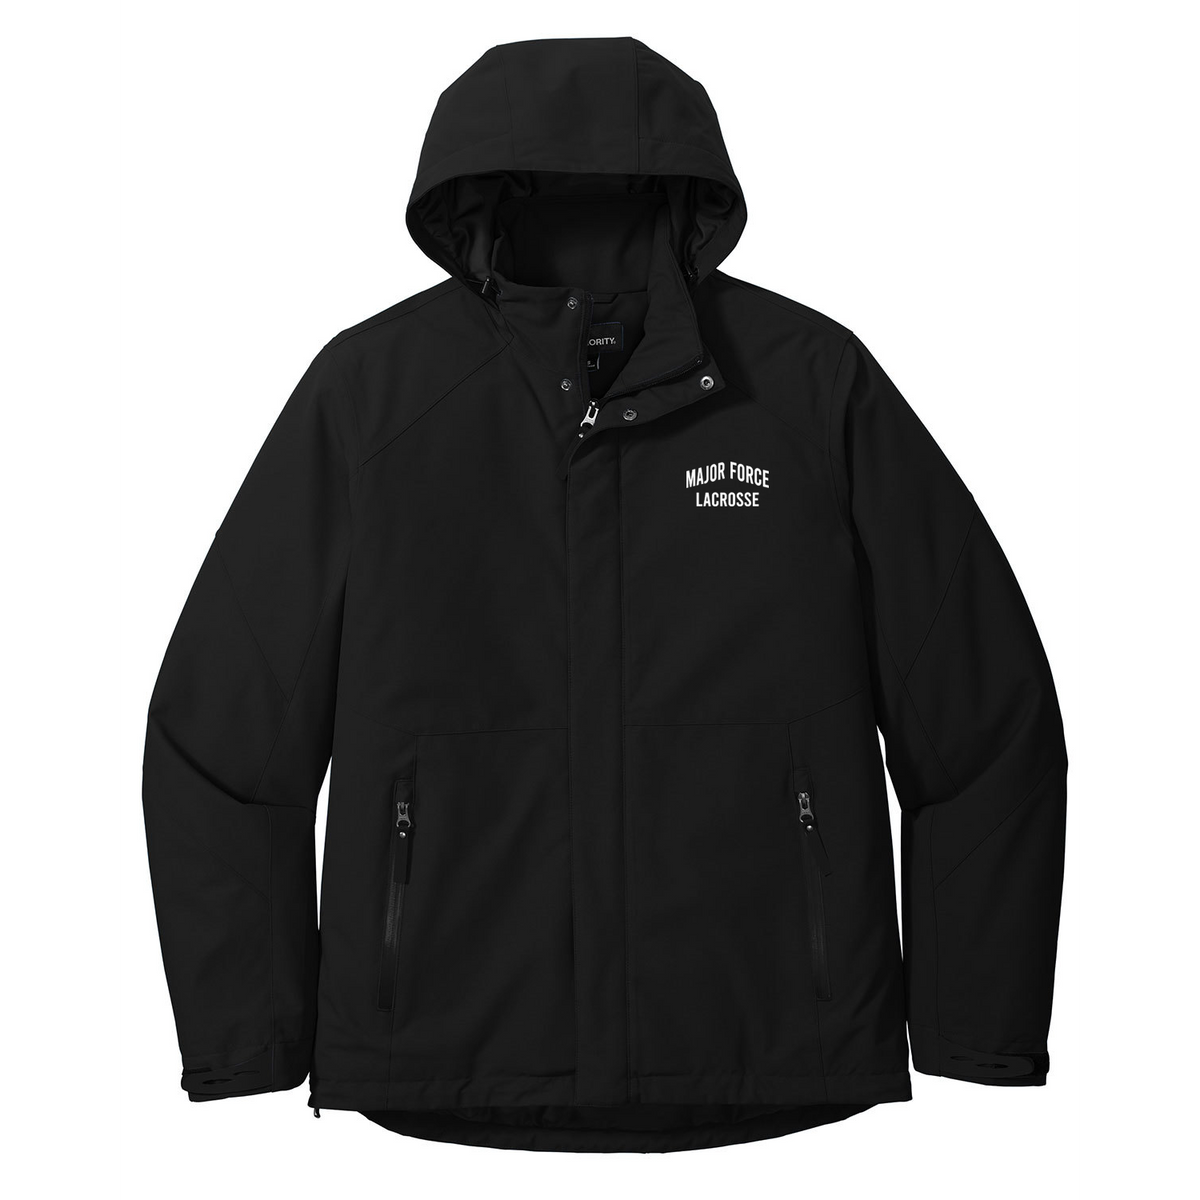 Major Force Lacrosse Insulated Tech Jacket